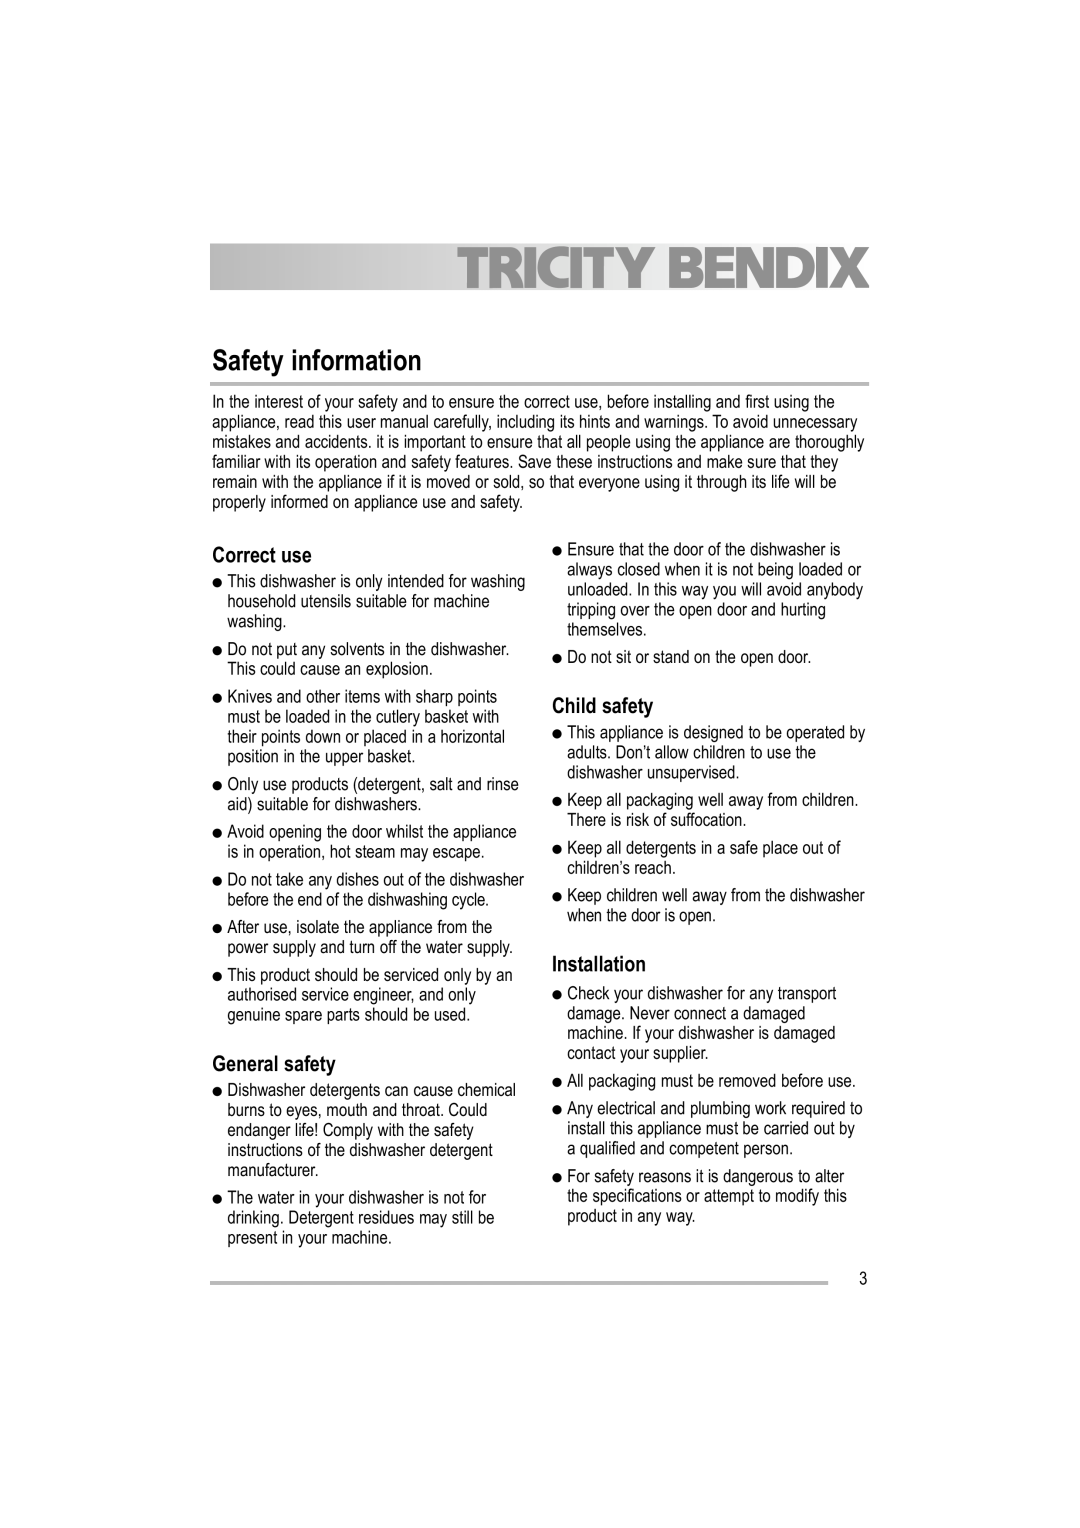 Tricity Bendix TBDW 32 manual Safety information, Correct use, General safety, Child safety, Installation 